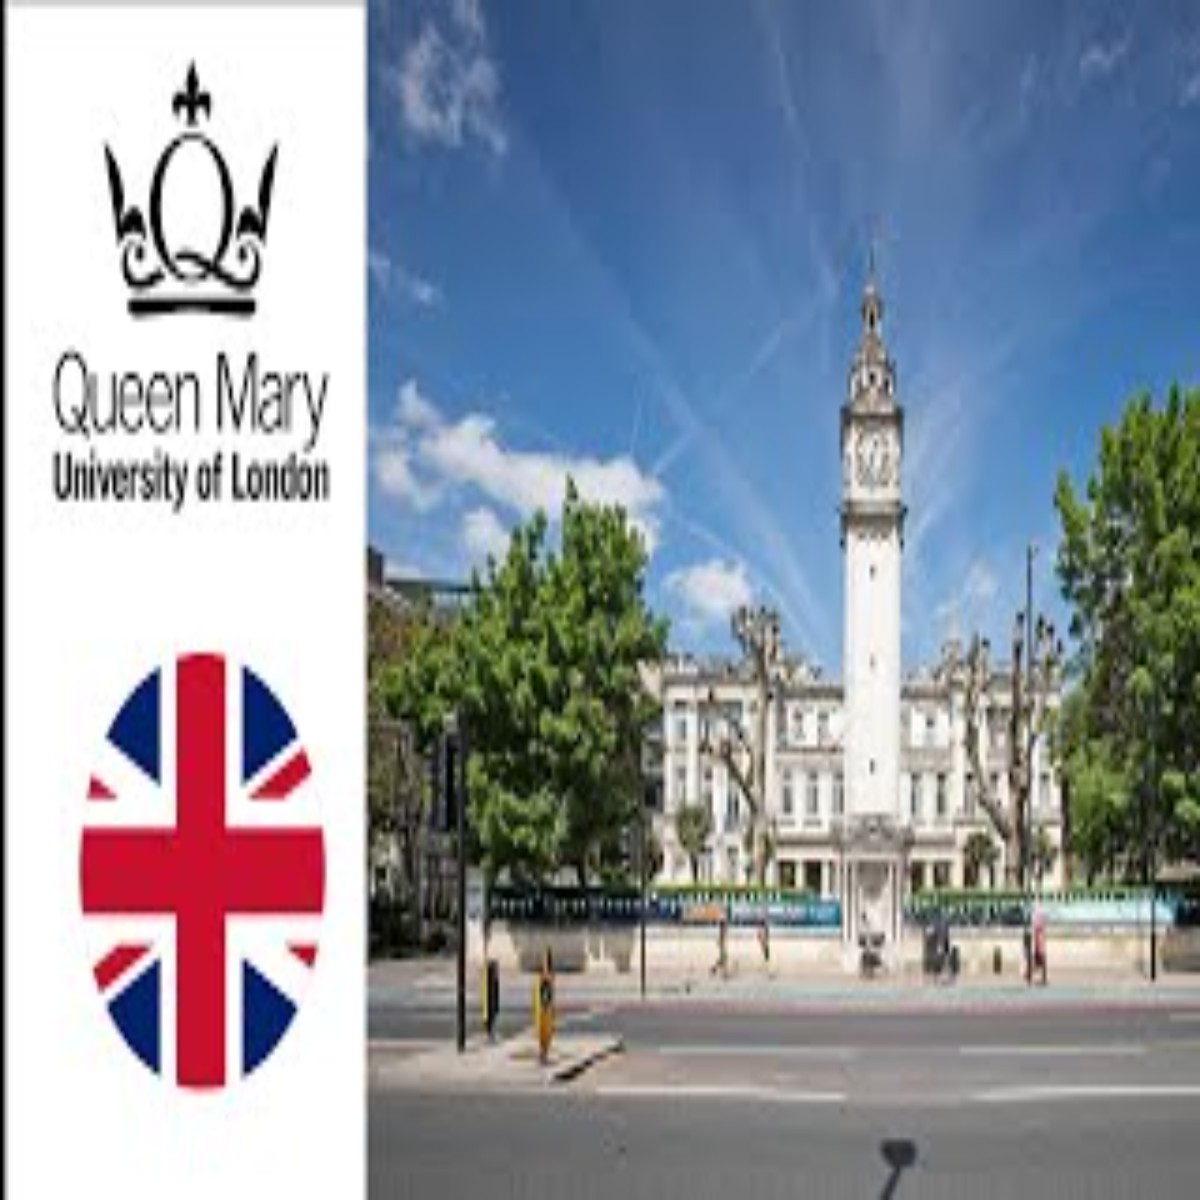 DeepMind Scholarship 2023 at Queen Mary University of London, UK